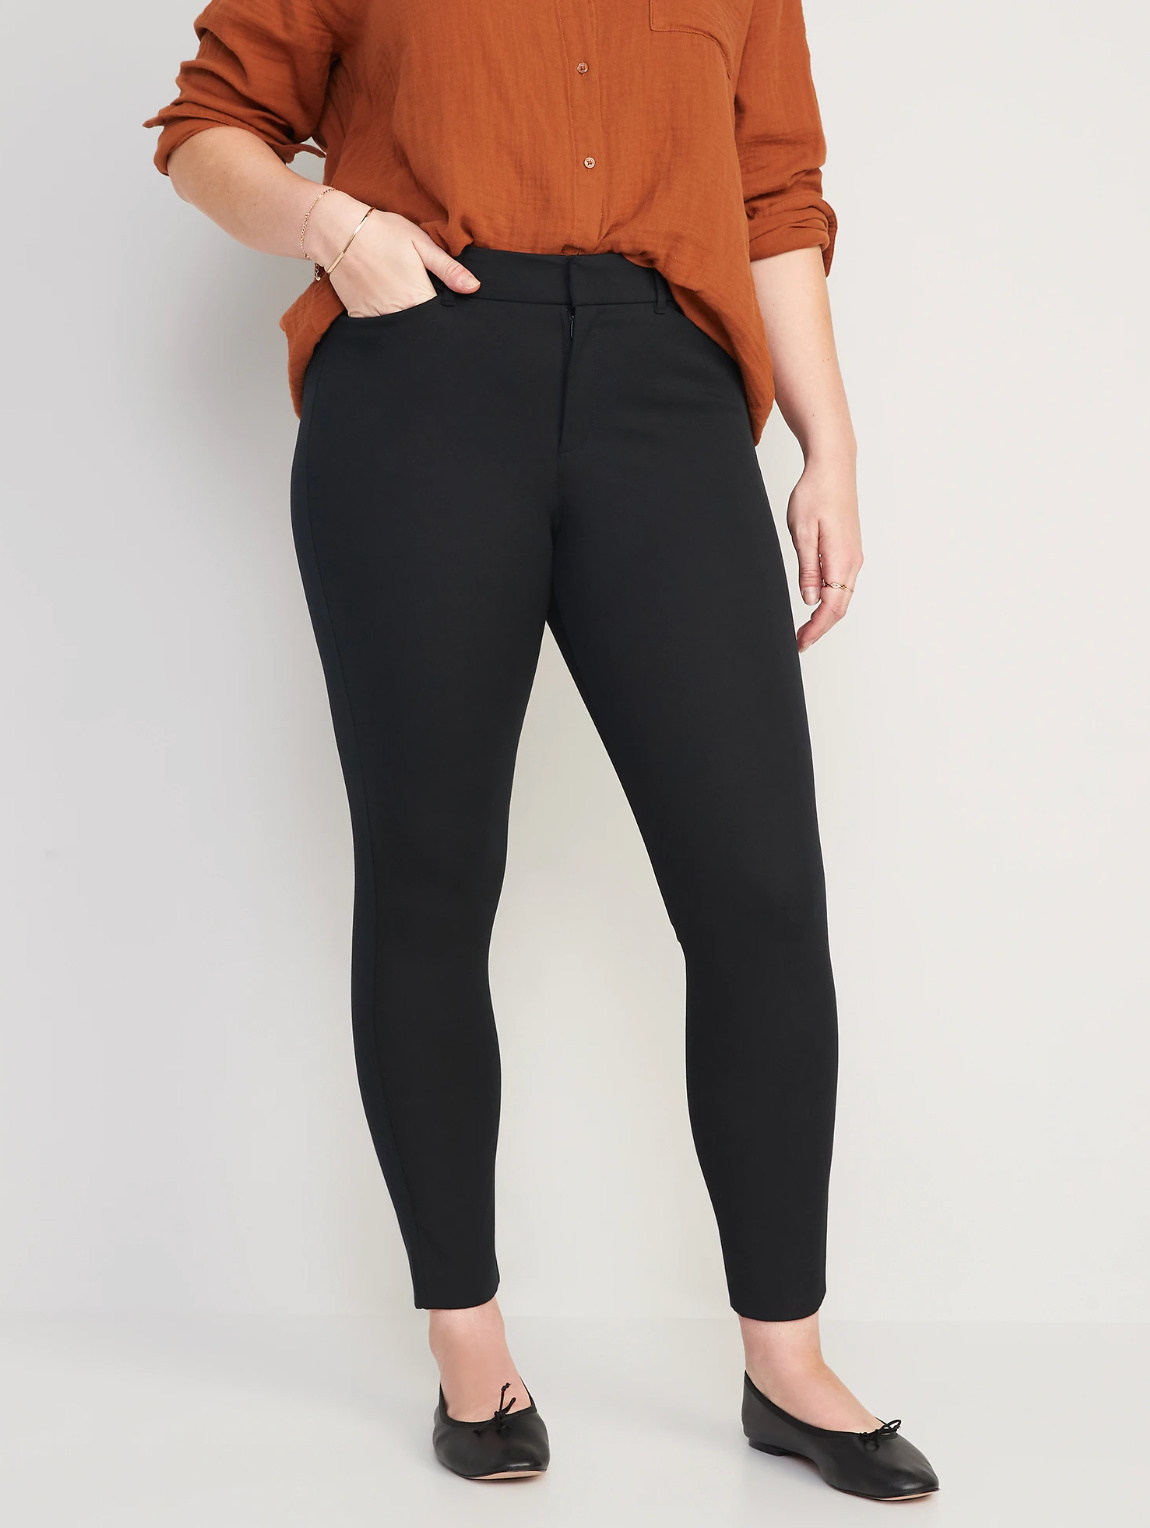 The Best Travel Pants for Women – [18 of the Best Pairs] | Global Munchkins  | Best travel pants, Pants for women, Travel pants women